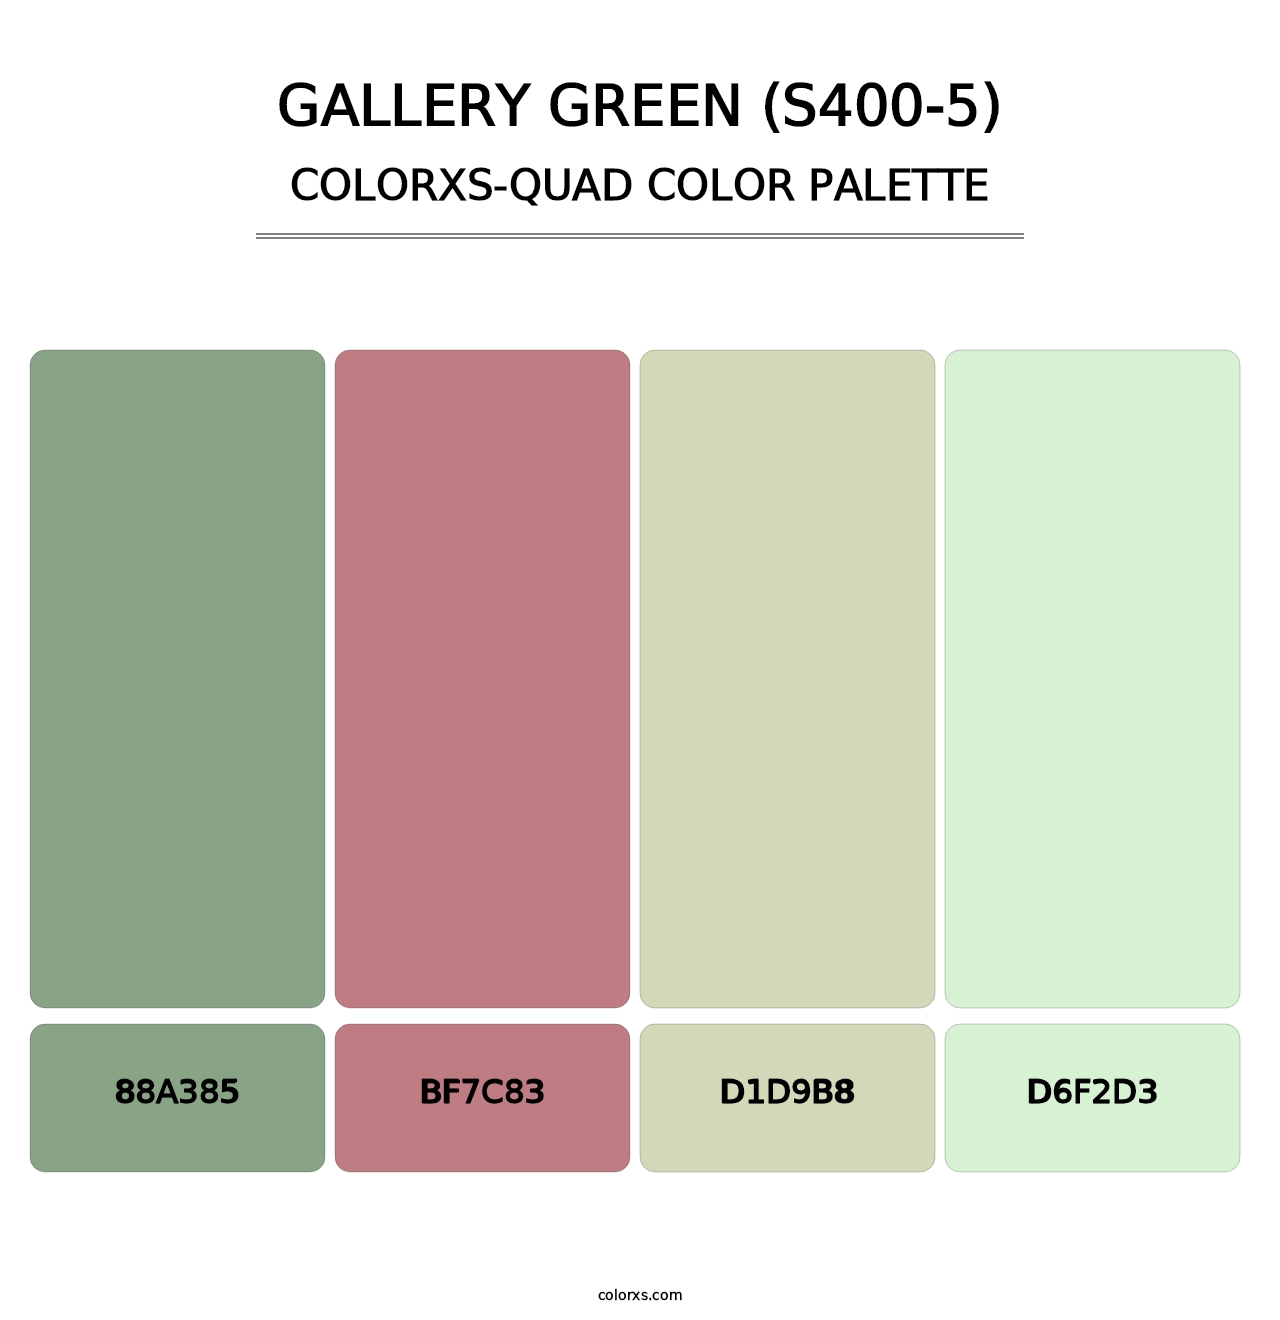 Gallery Green (S400-5) - Colorxs Quad Palette